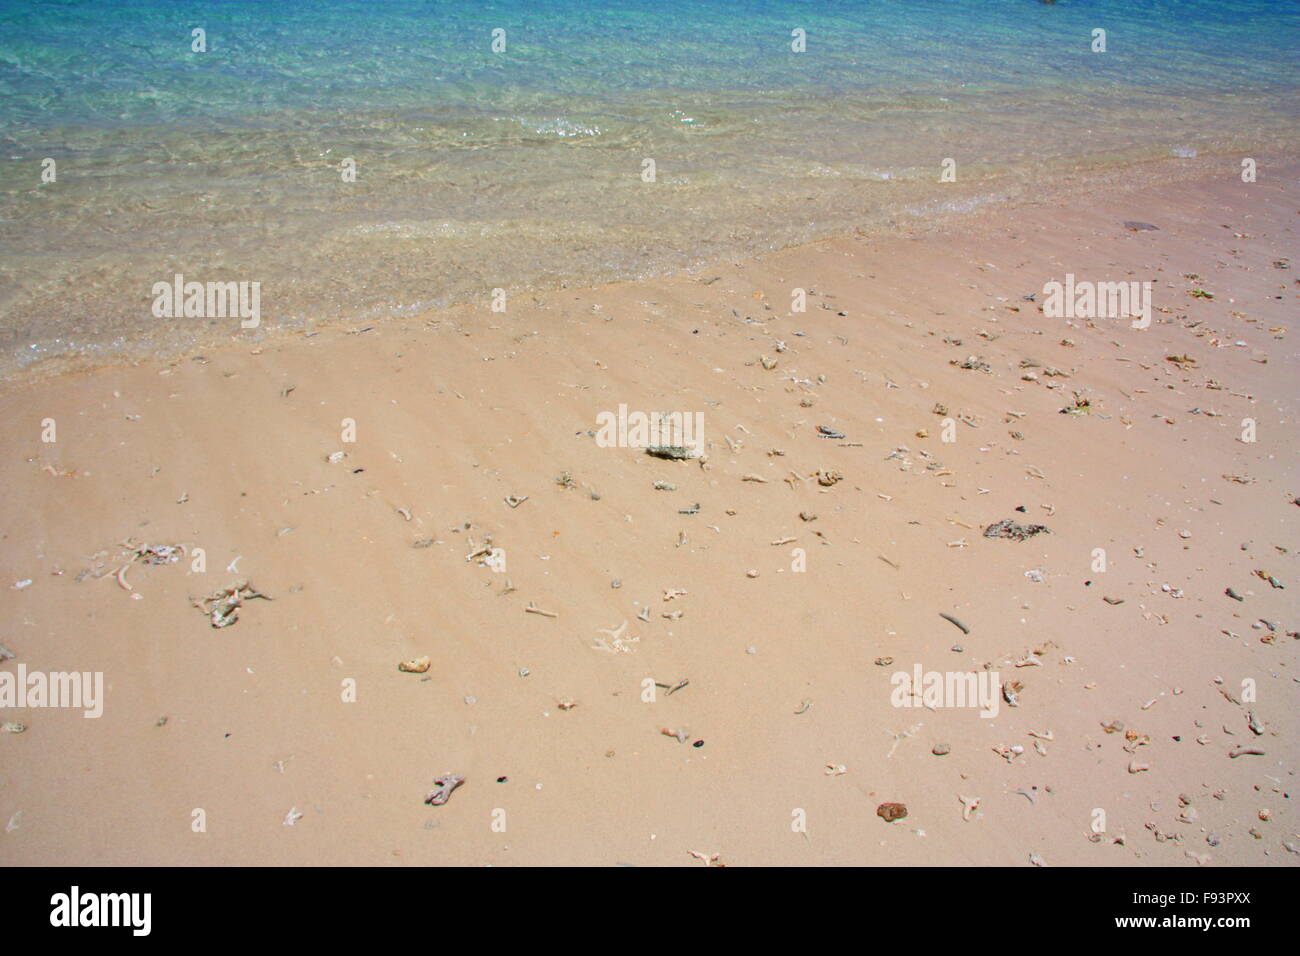 The edge of the water and wet the sand. On the sand, scattered fragments of coral and shells. Mauritius, Indian Ocean Stock Photo